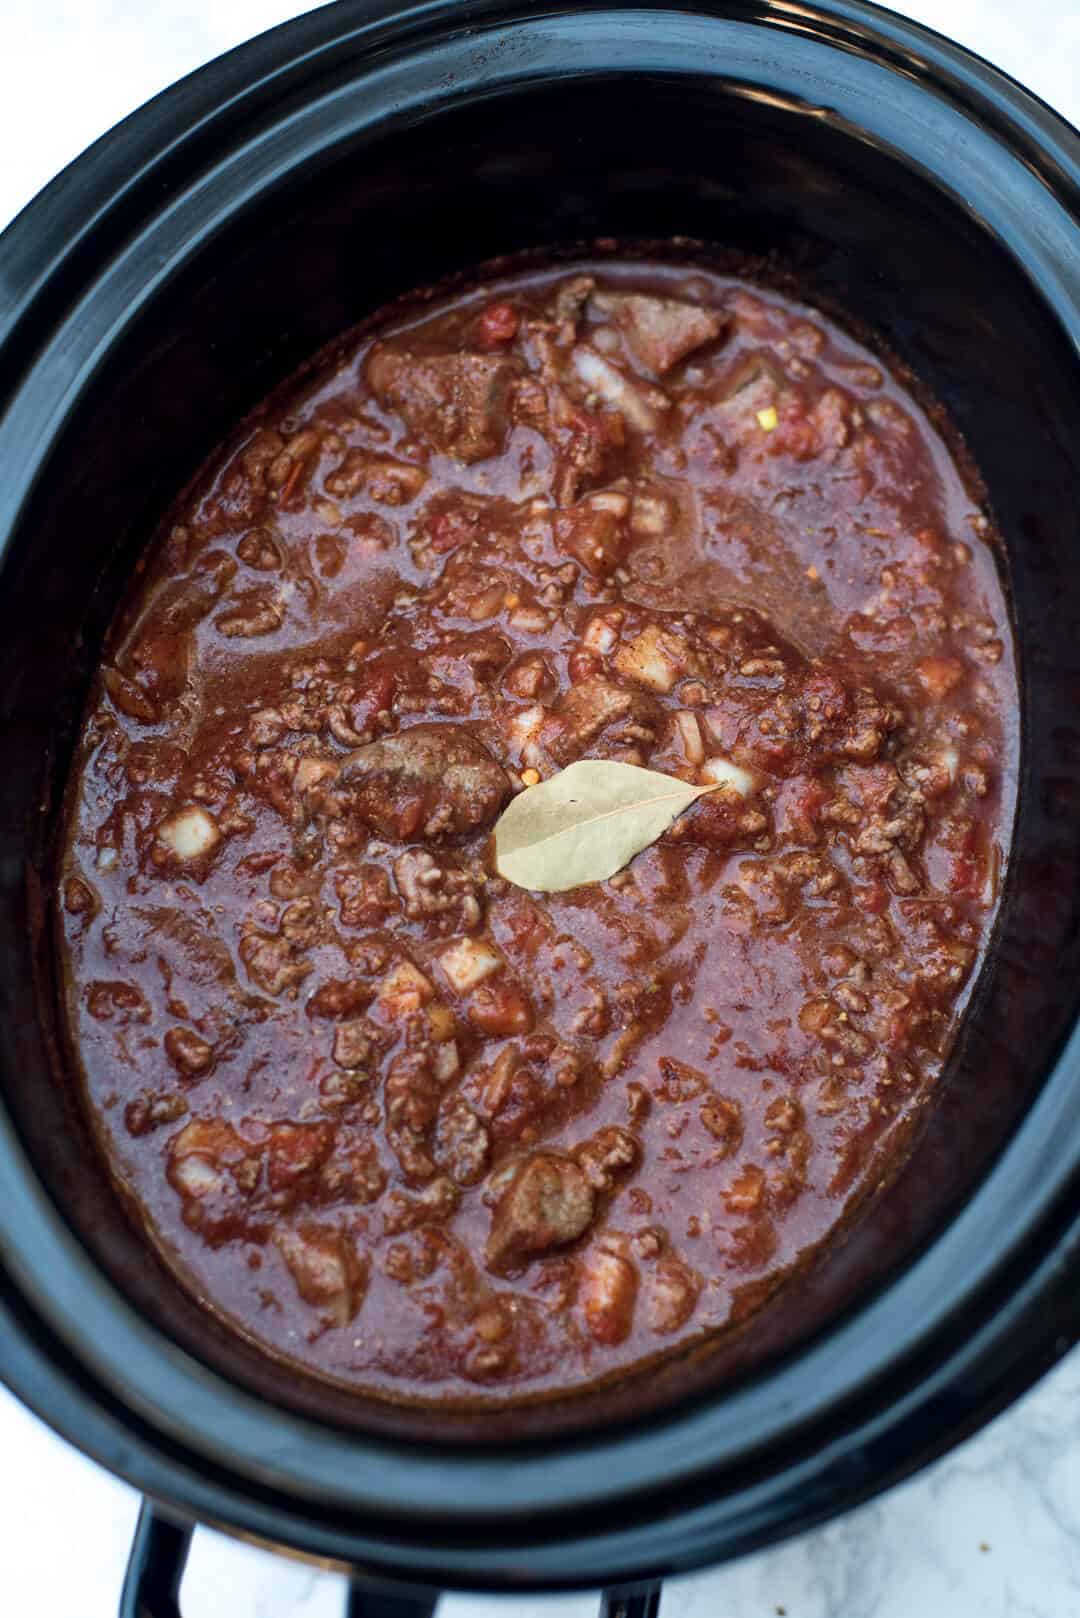 A bay leaf rests on top of a chili mixture in a slow cooker.